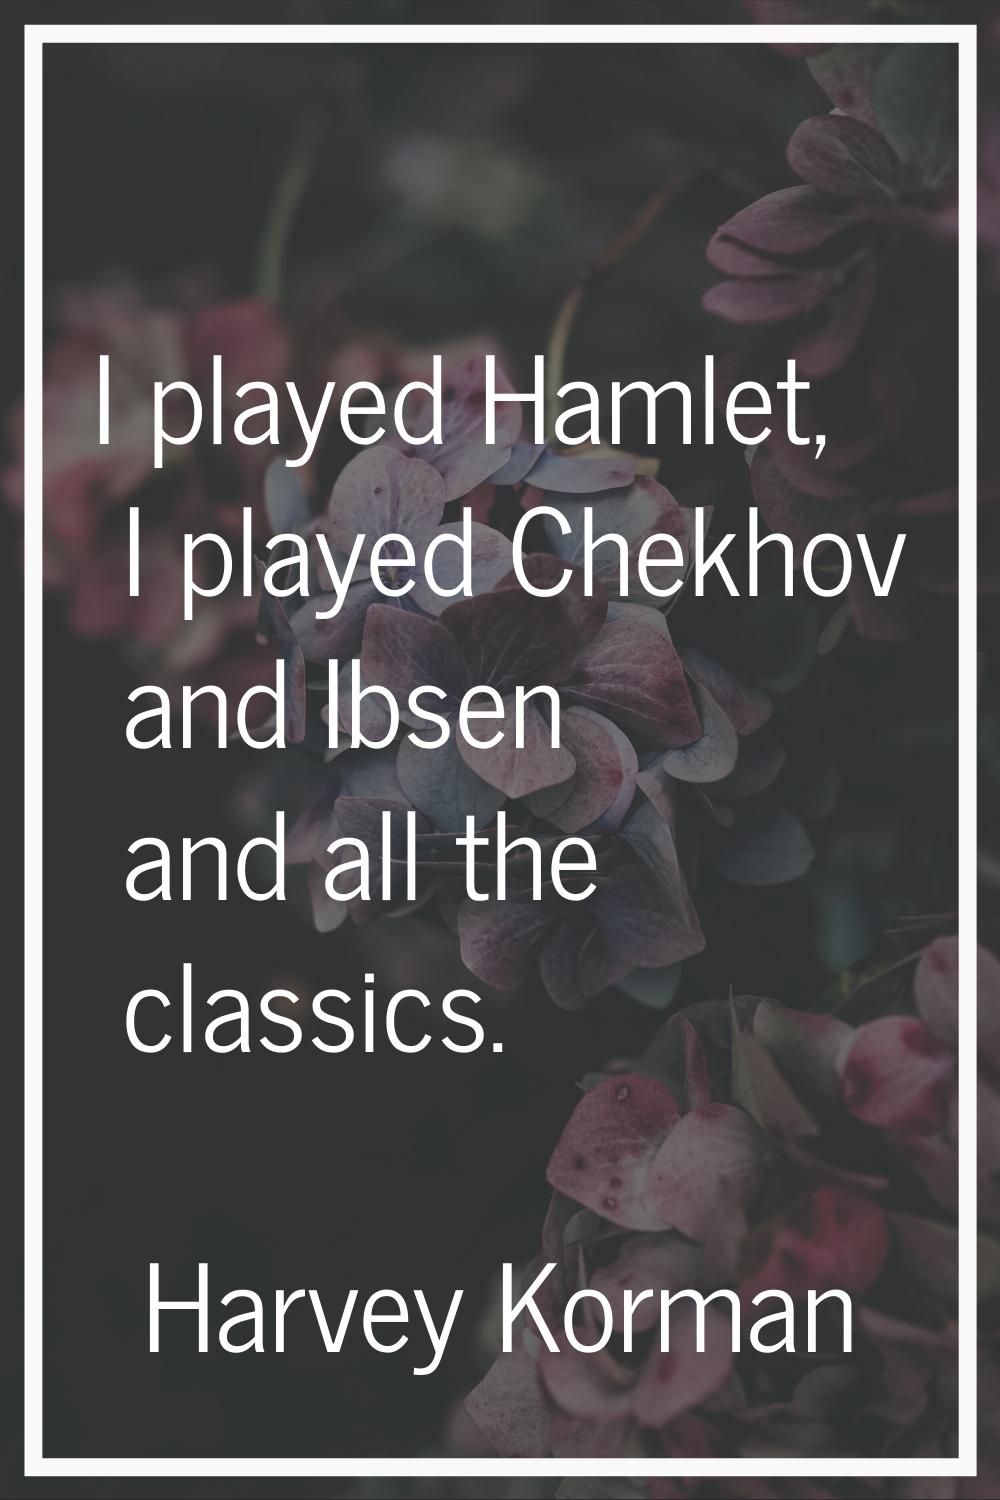 I played Hamlet, I played Chekhov and Ibsen and all the classics.